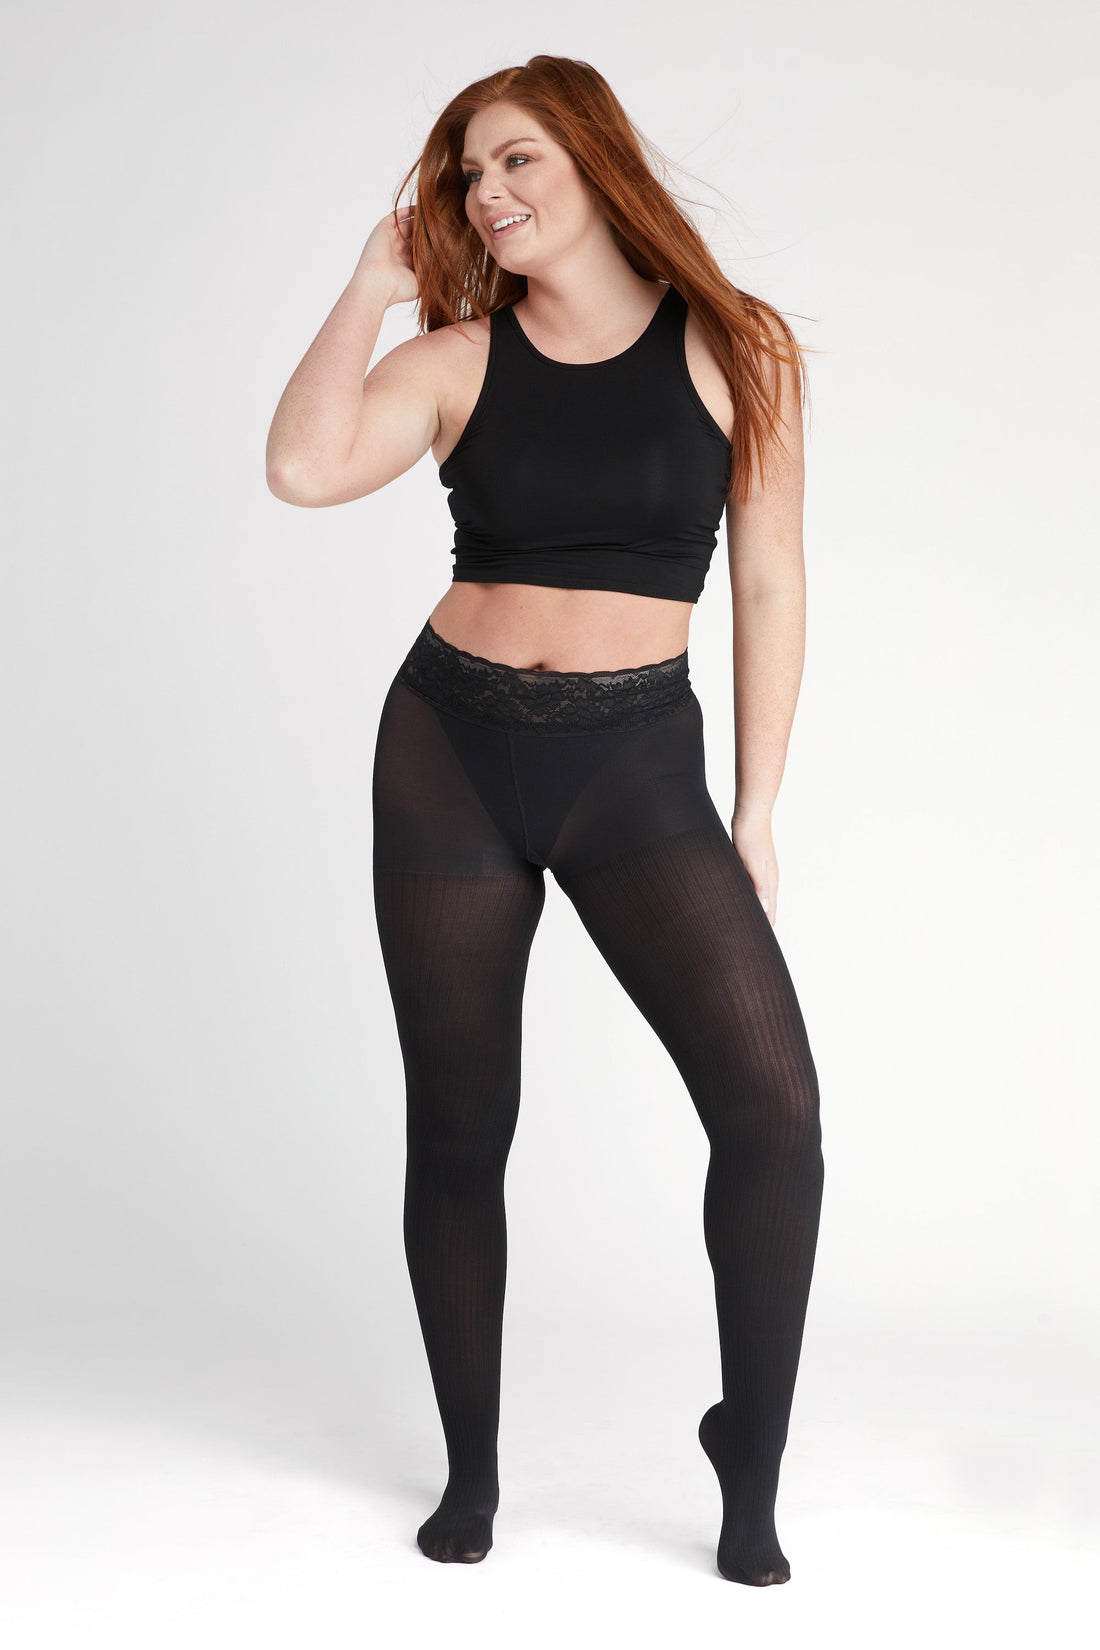 Buy Footless Tights Plus Size  Fast UK Delivery - Insight Clothing